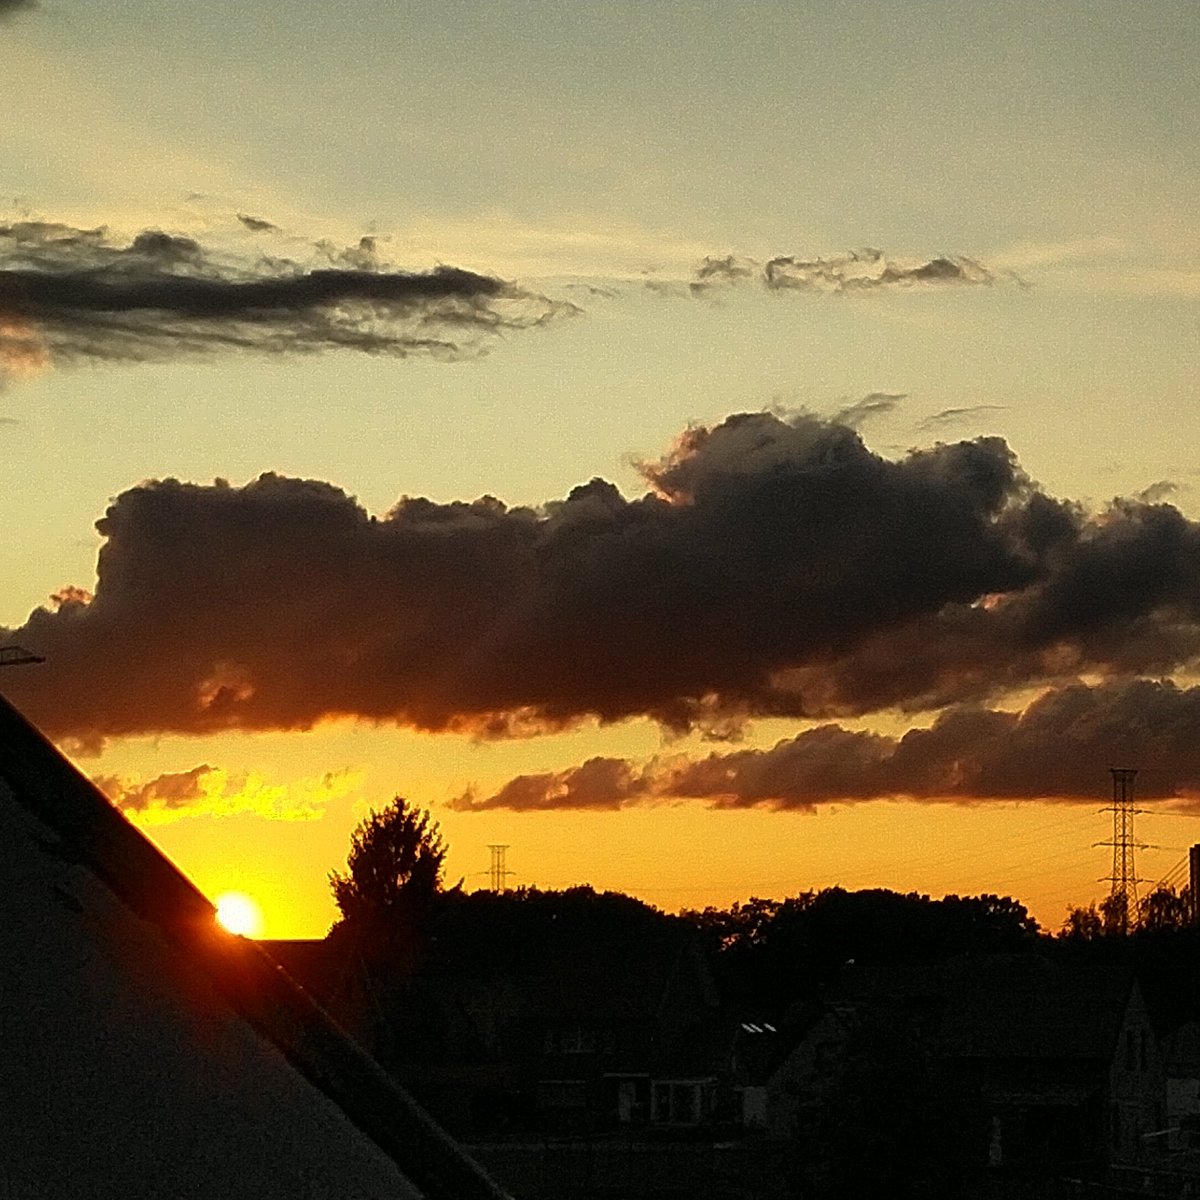 ✦ 18/08/2019Sunset seen from the window of my dorm room 